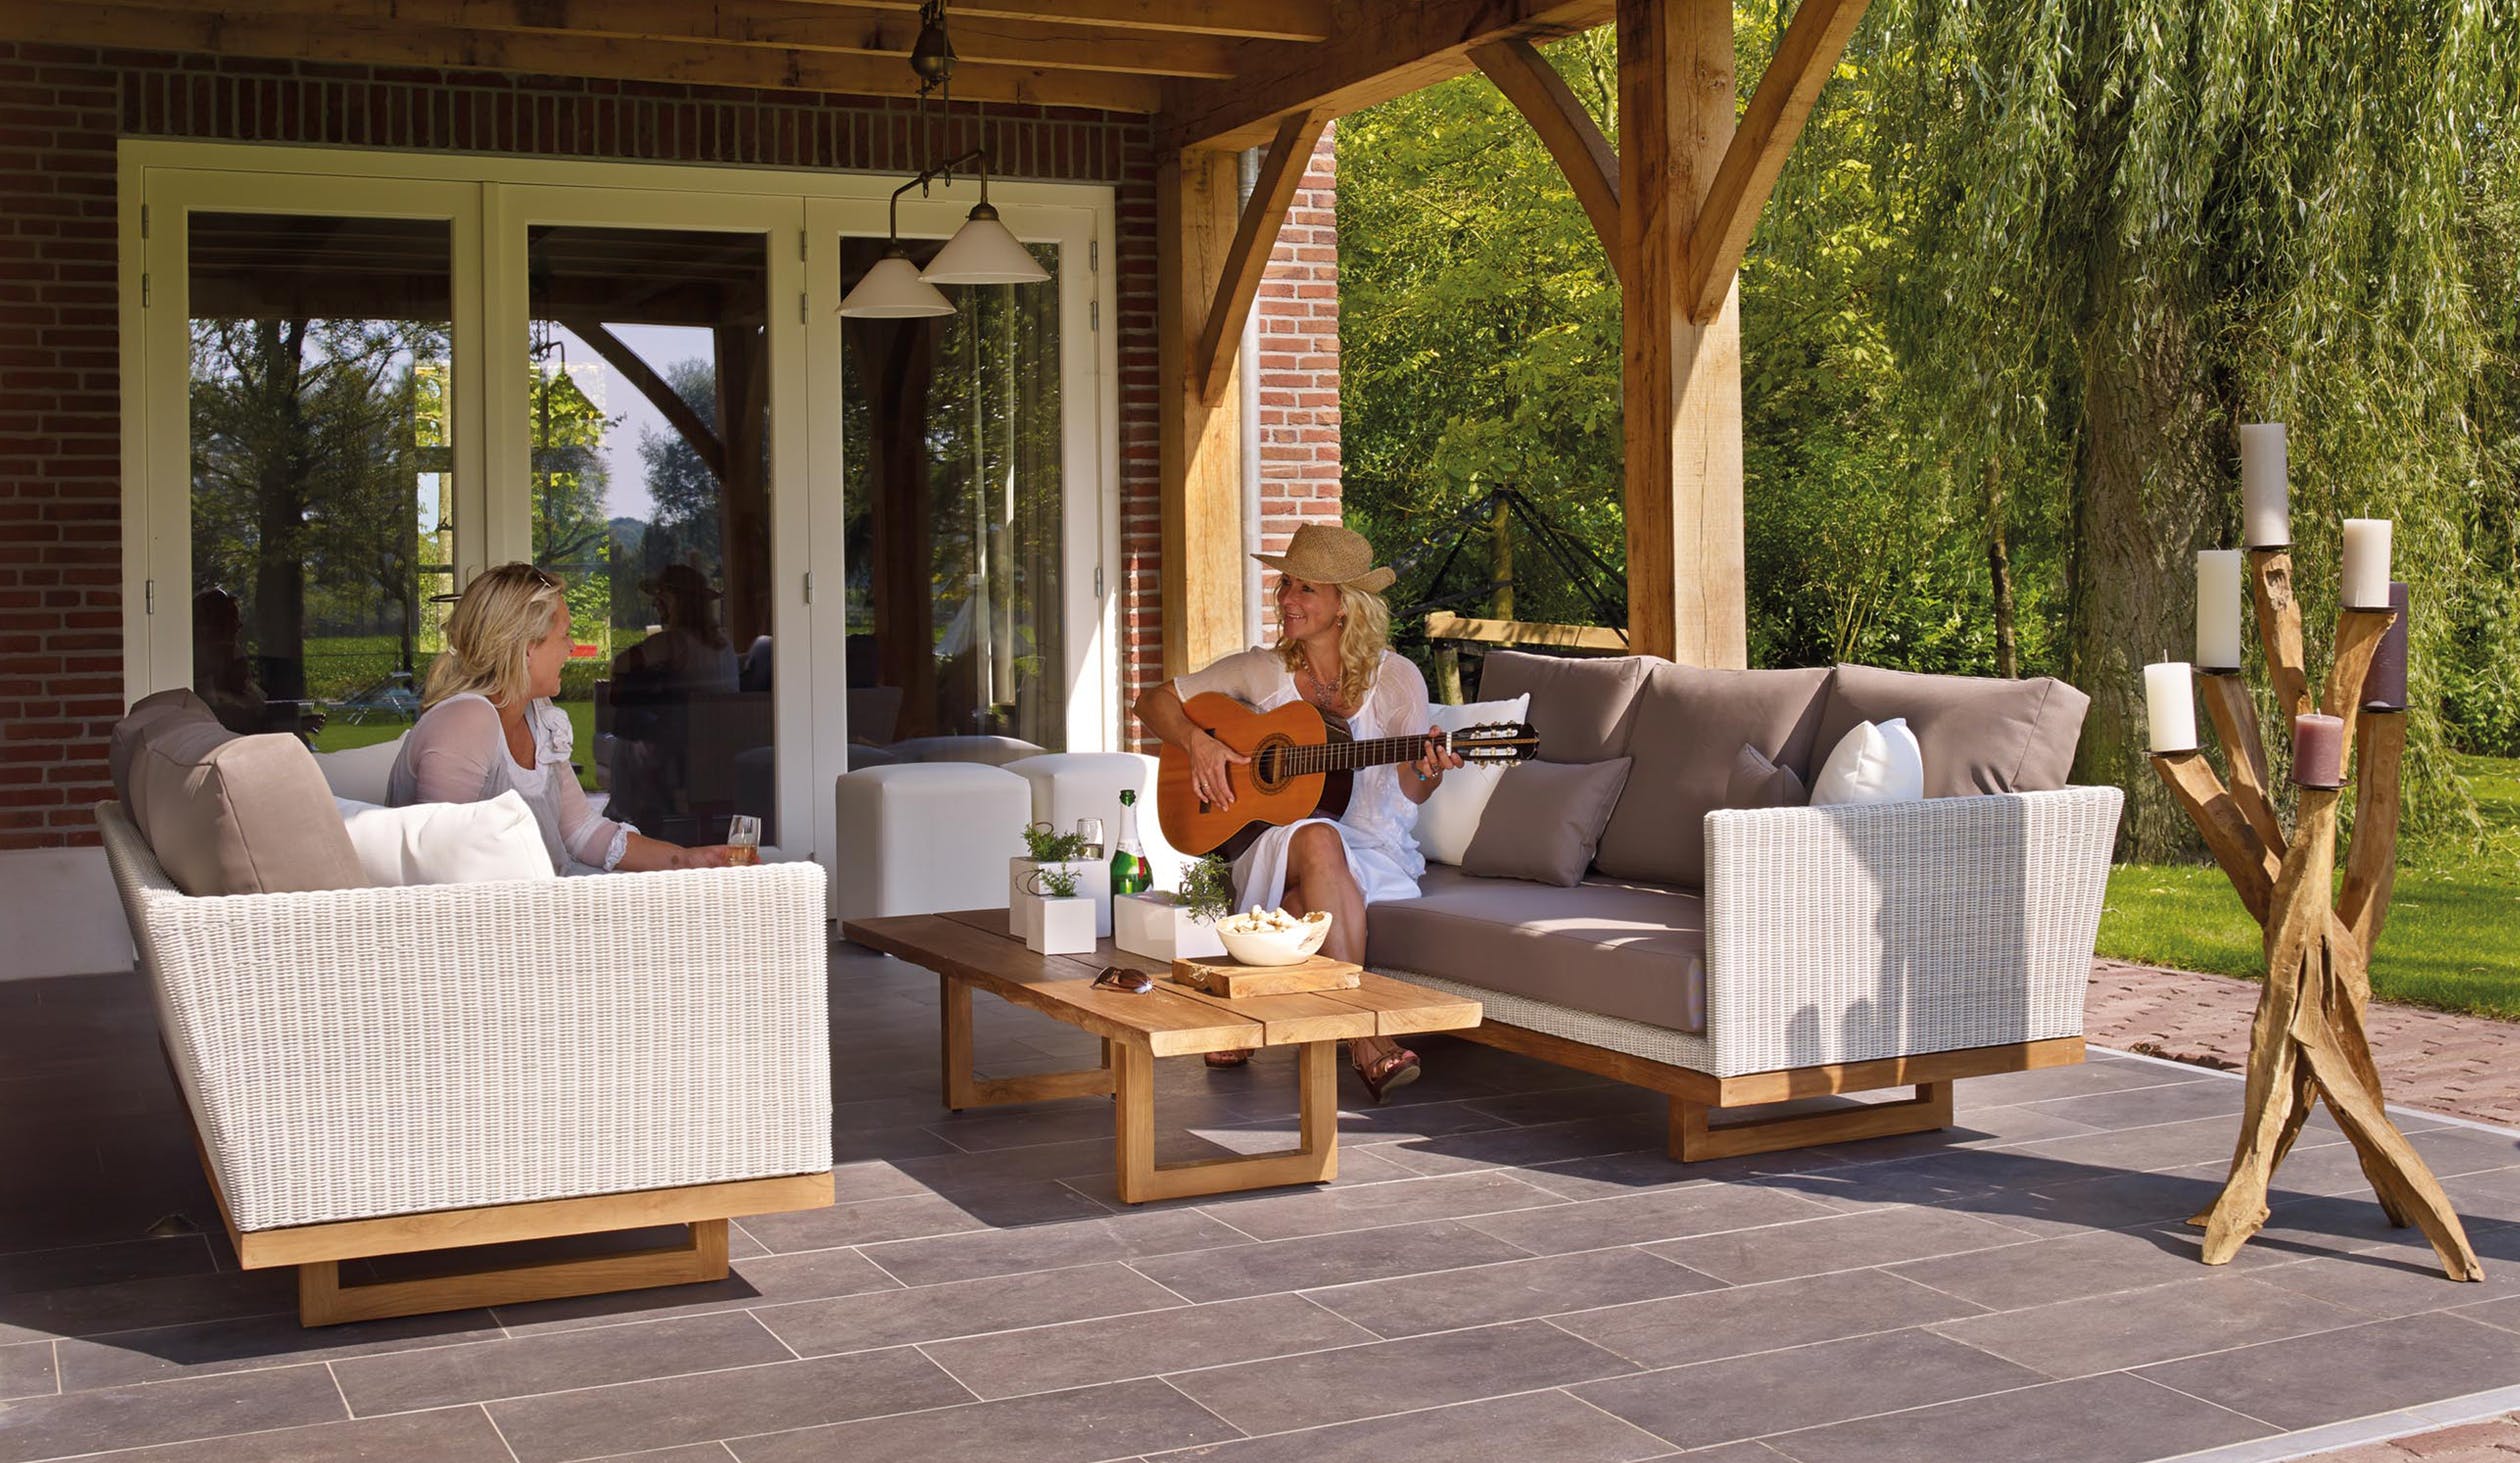 Hardscaping your Outdoor Area for Entertaining Guests